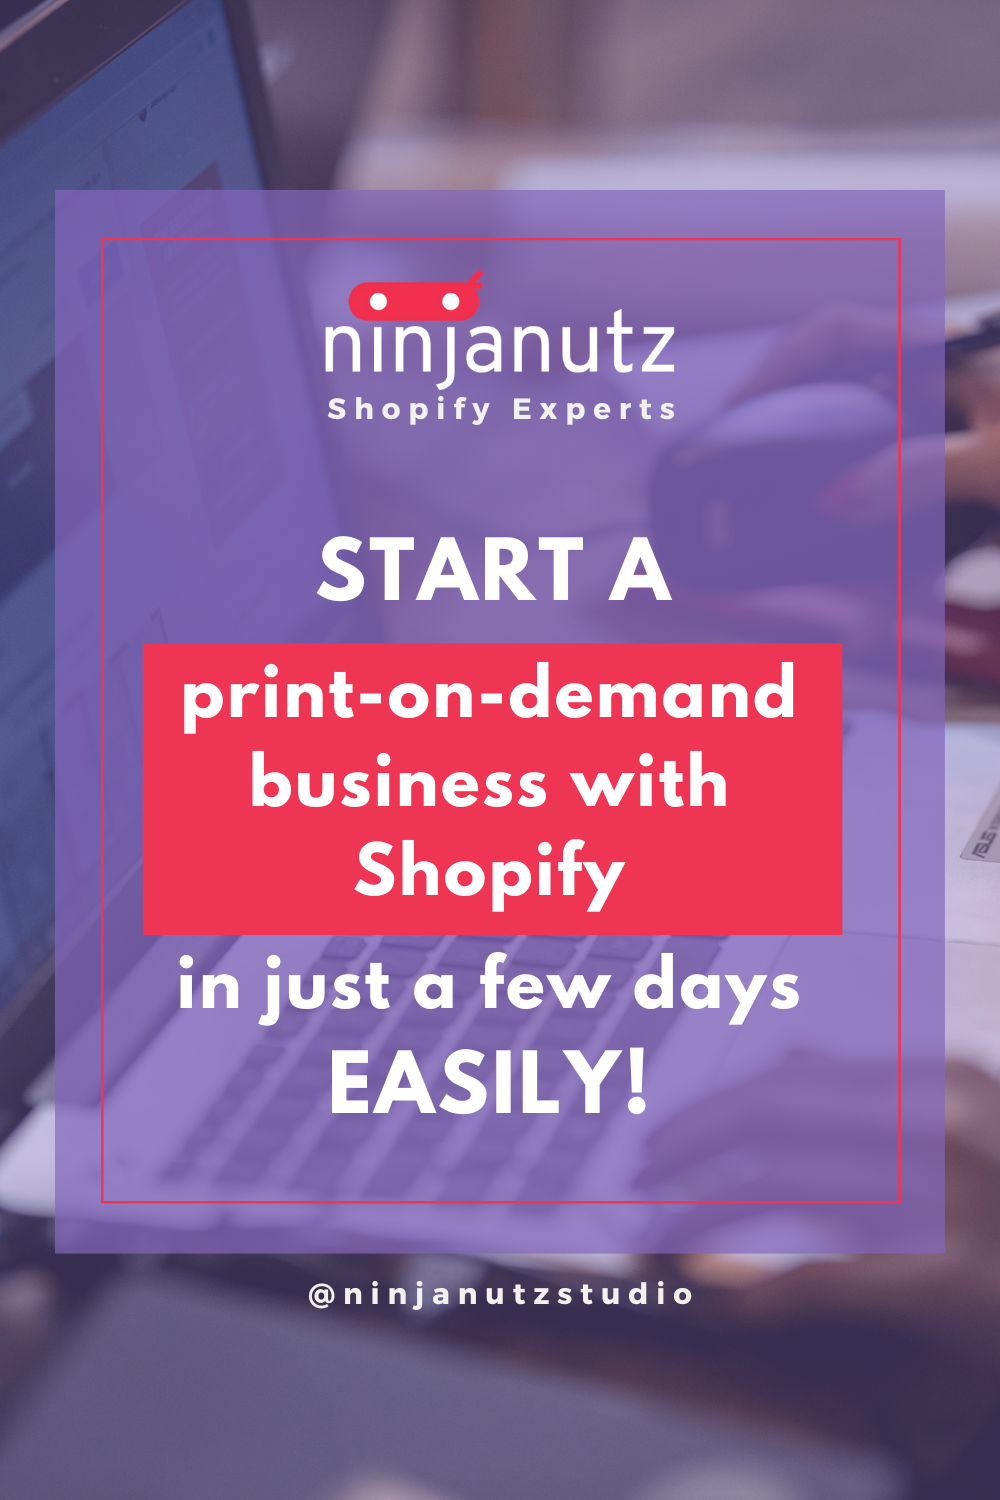 Start a print-on-demand business with Shopify in just a few days easily!